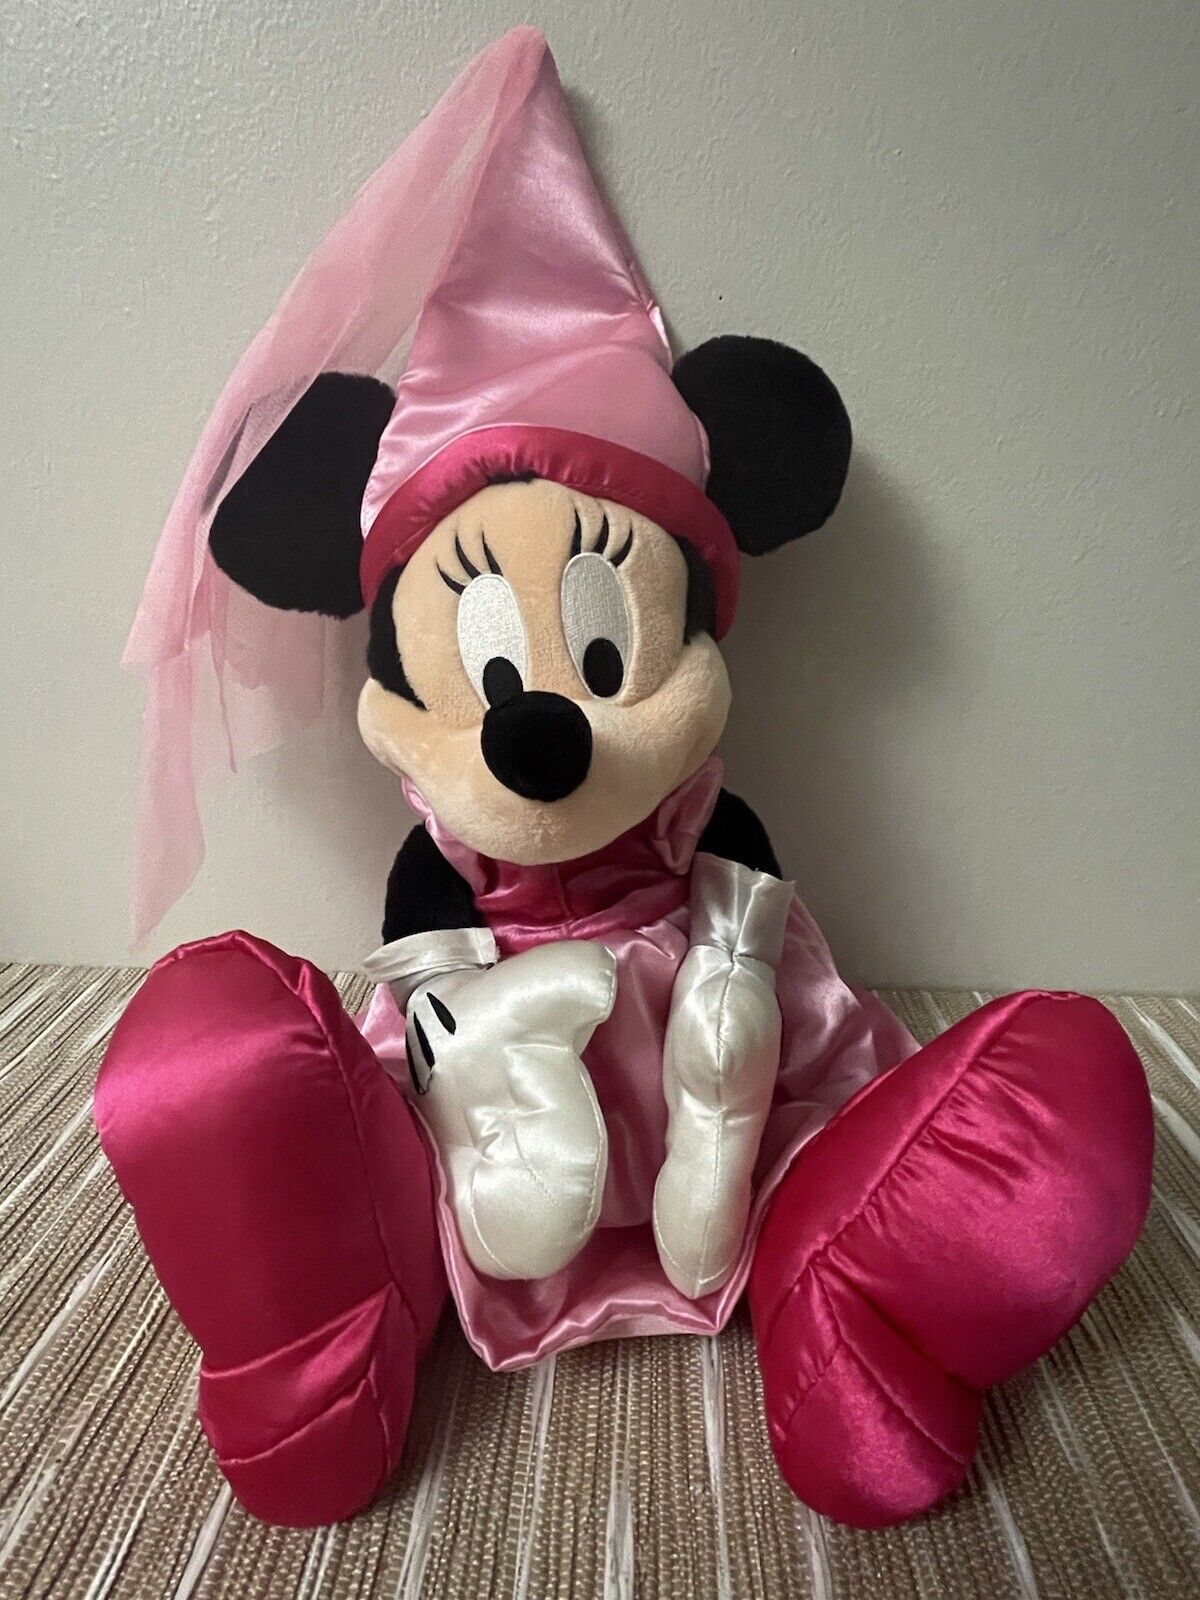 DISNEY PARKS Minnie Mouse in Pink Princess & Veil Outfit 22-in Plush Toy